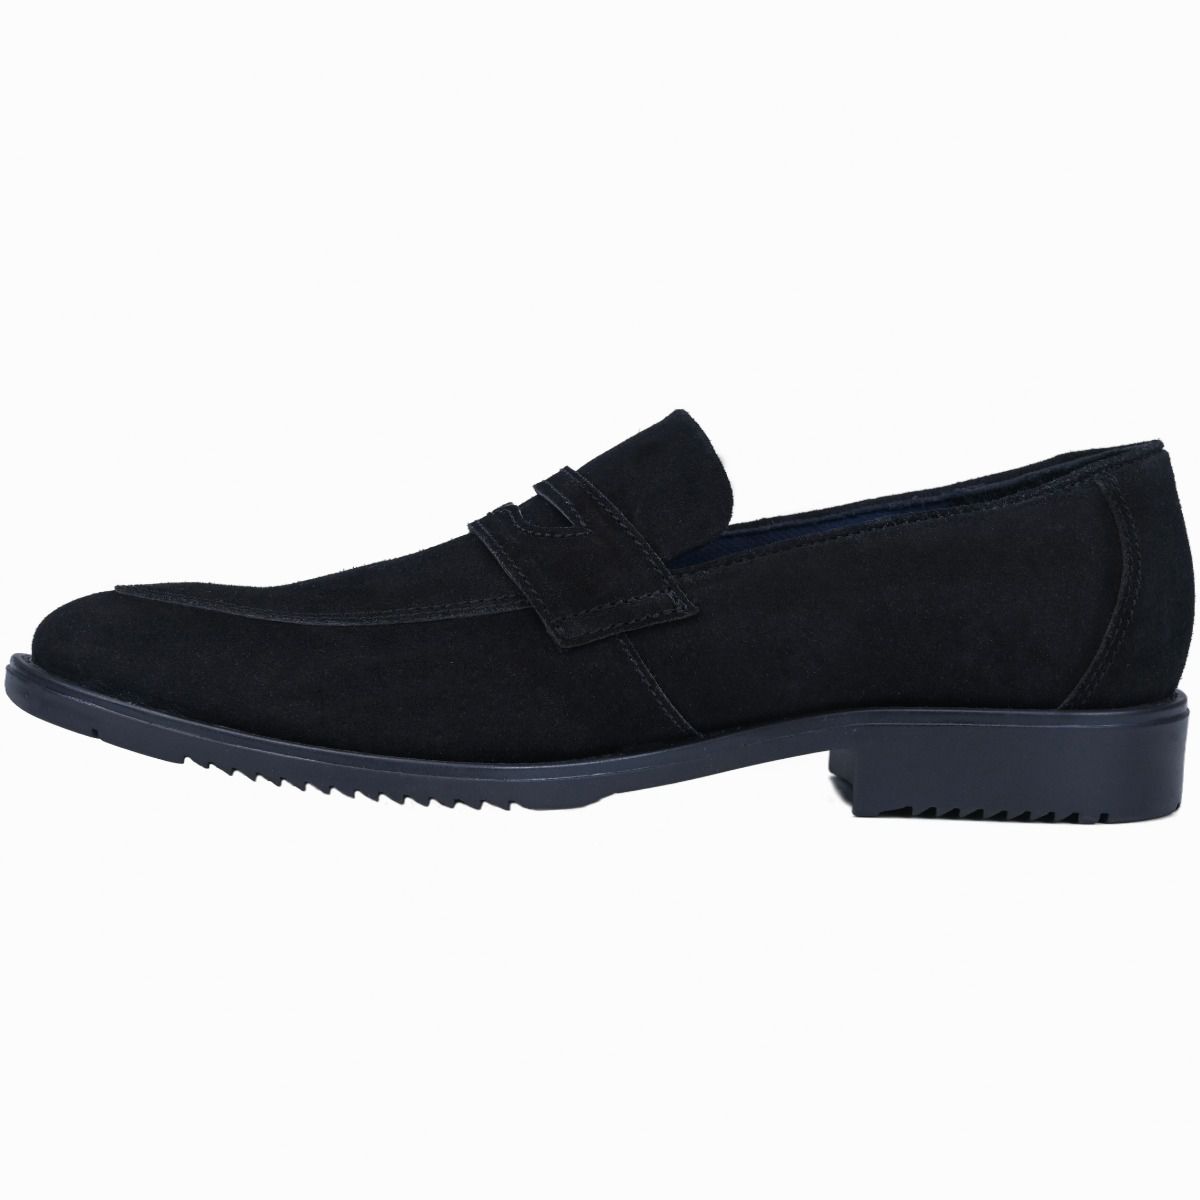 OHM New York Penny Loafers in Suede with Cushion Footbed in Black